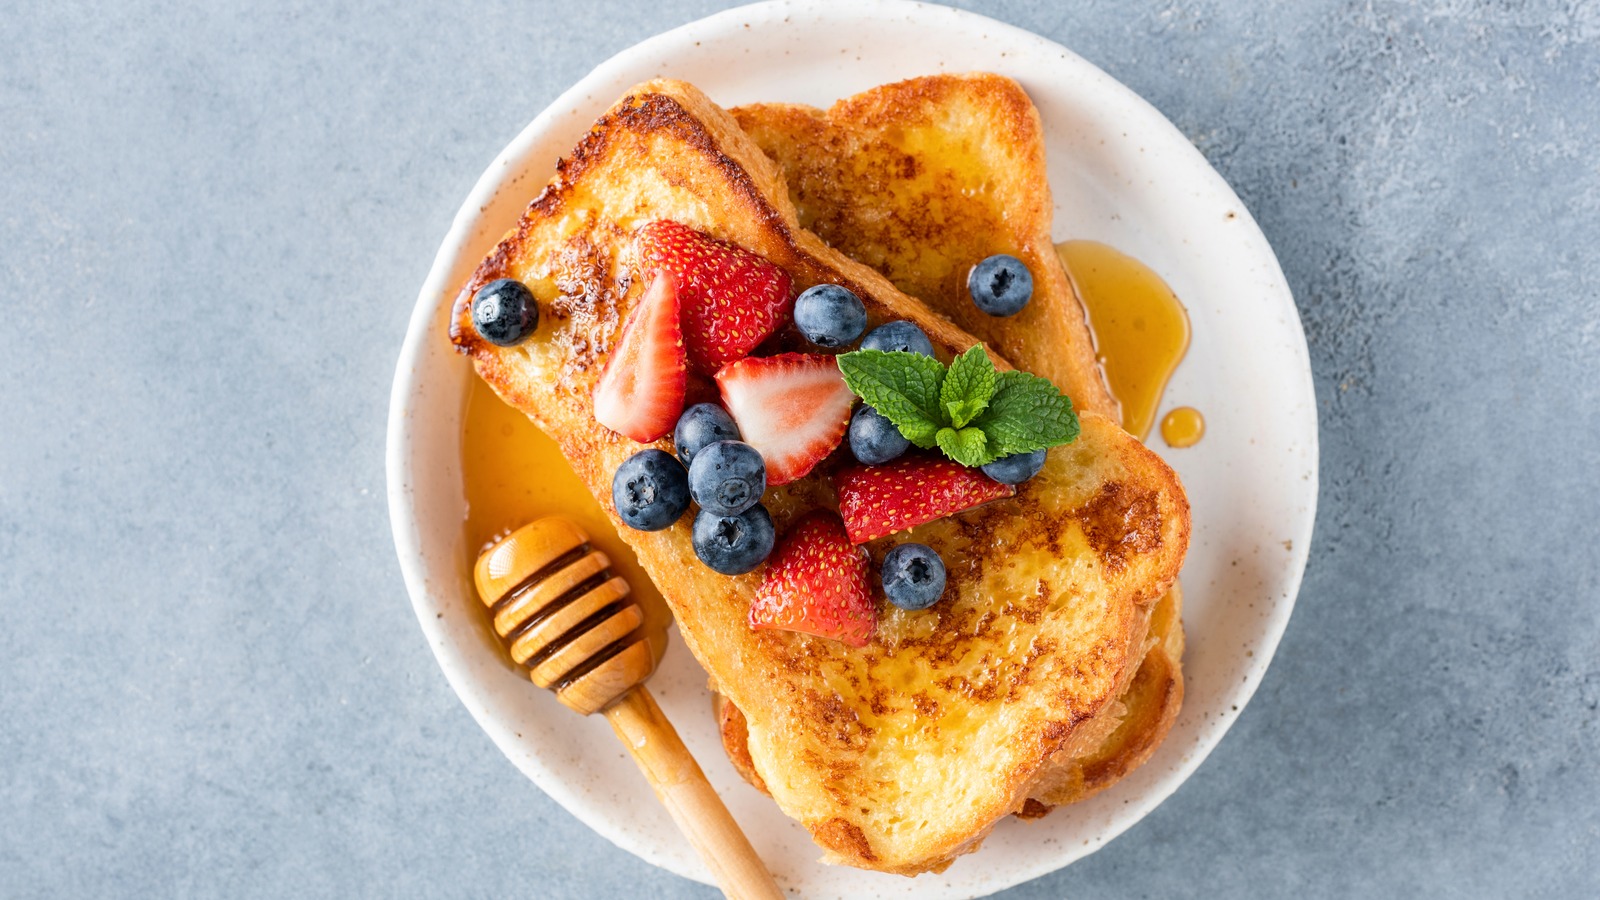 Delicious Twists On French Toast That Will Stir Your Cravings